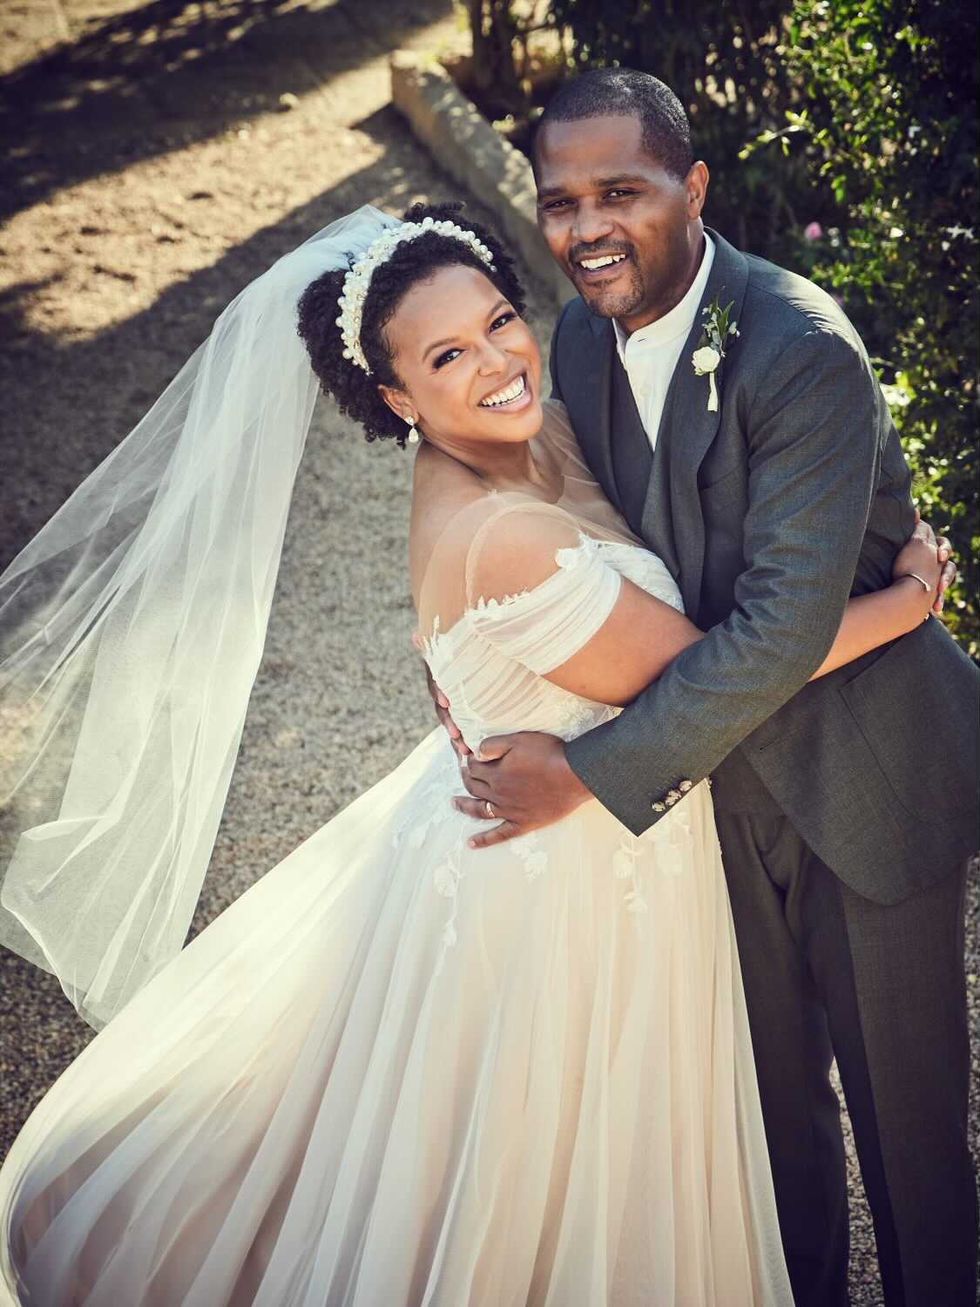 Gayle King Shares Exclusive Photo From Daughter Kirby's Wedding